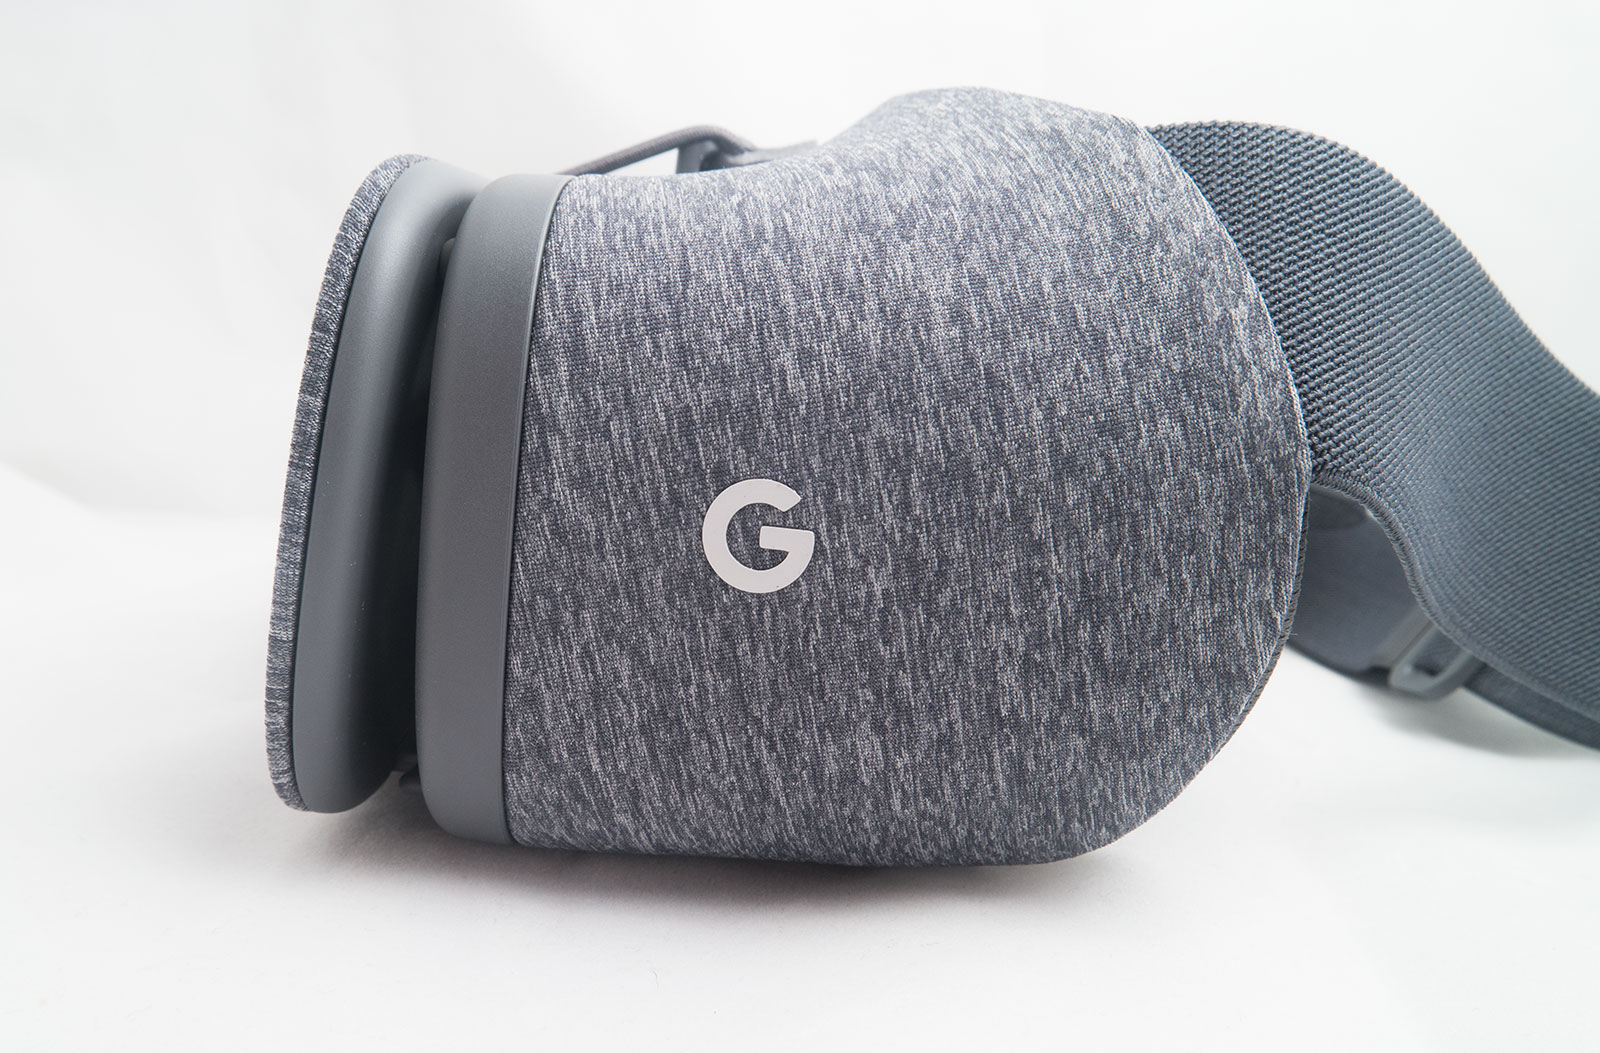 Billy ged couscous I nåde af Review: Google Daydream View VR headset